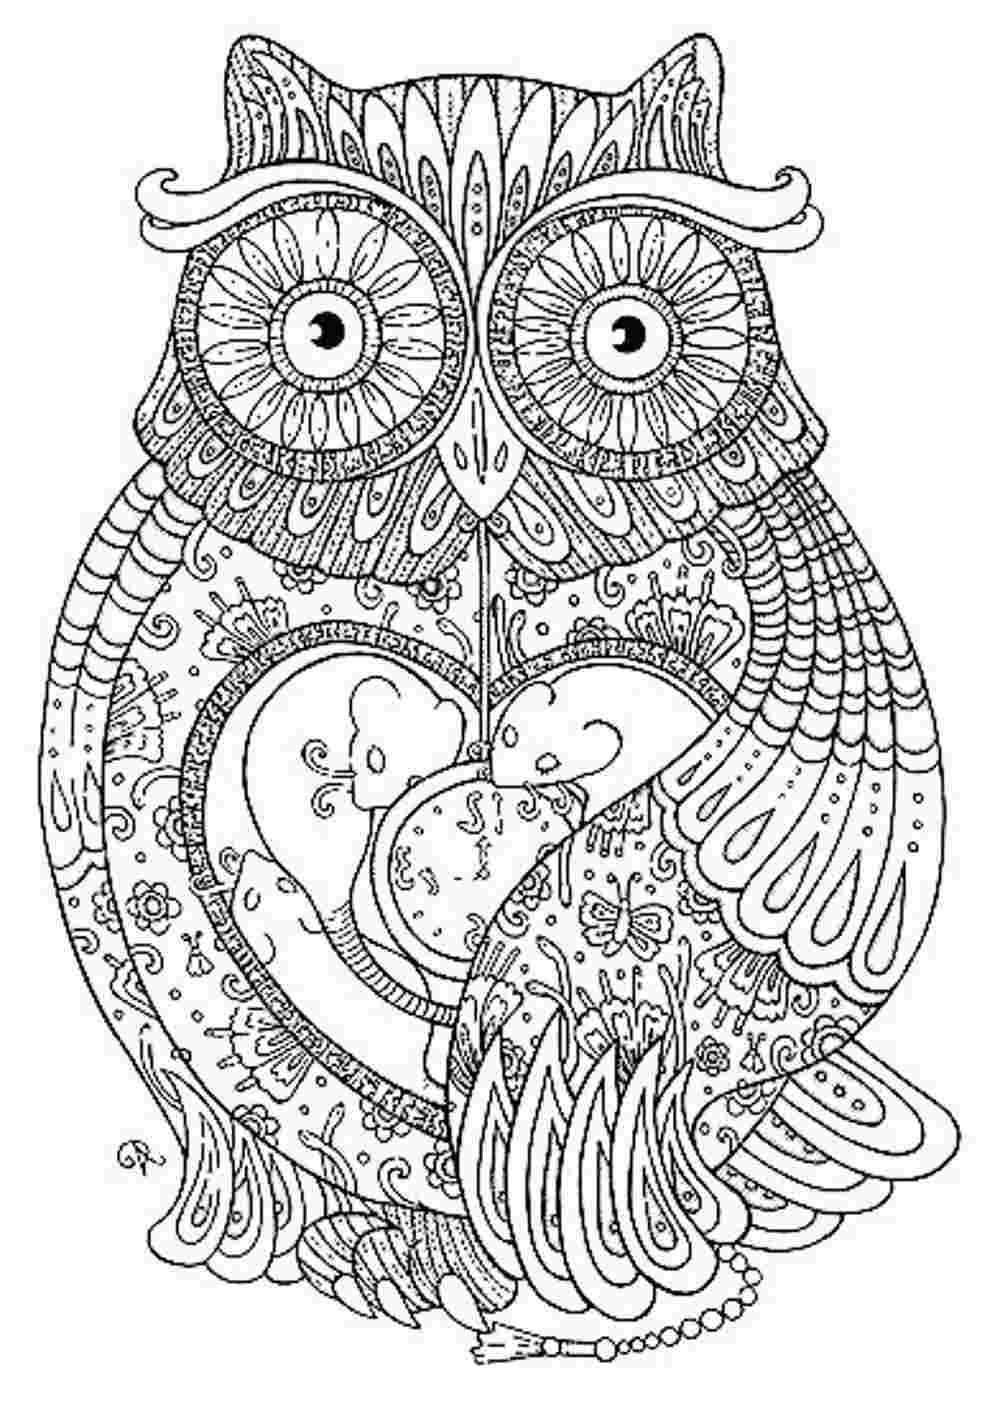 Animal mandala coloring pages to download and print for free | Owl ...